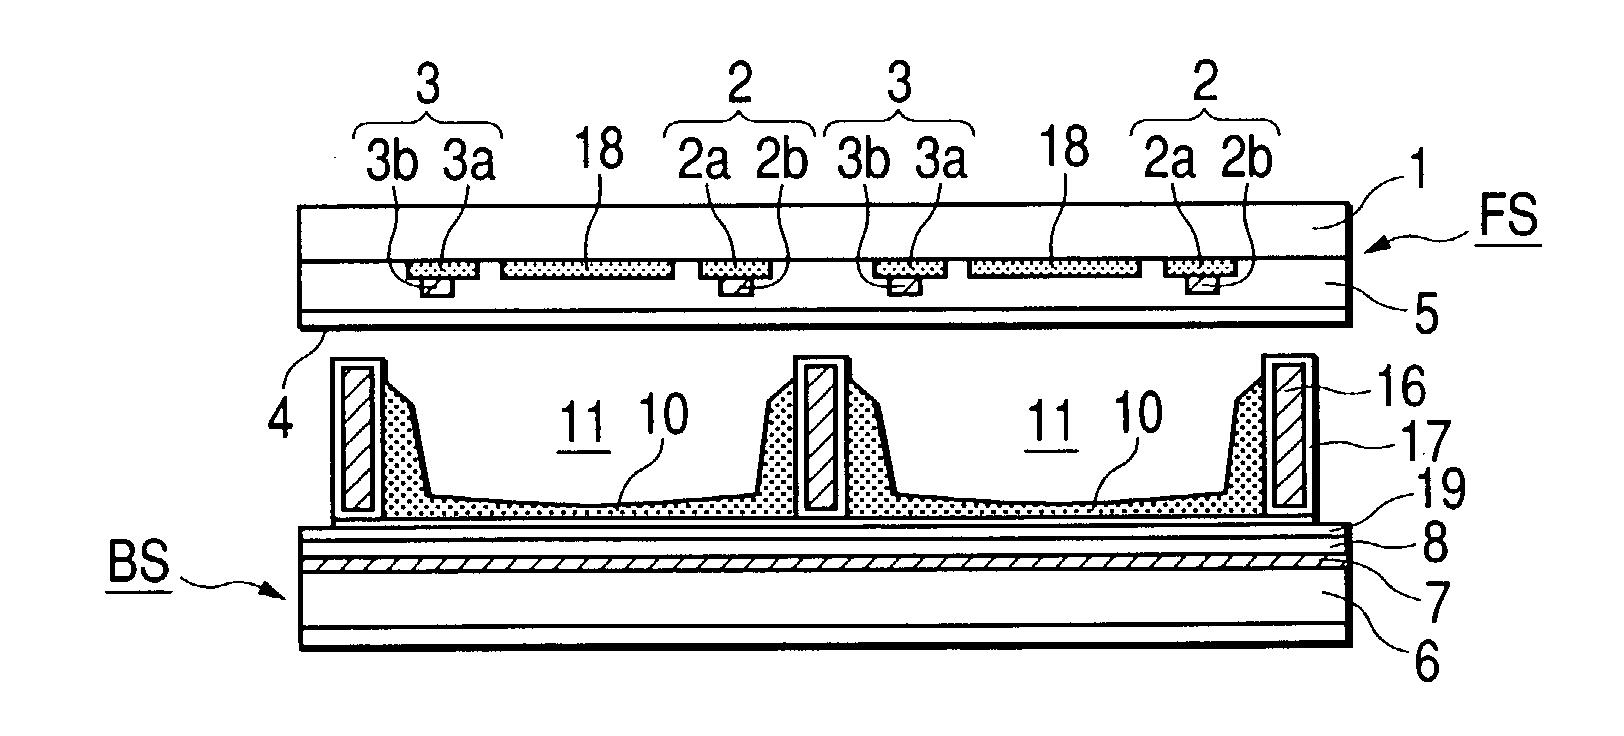 Plasma display panel and display employing the same having transparent intermediate electrodes and metal barrier ribs